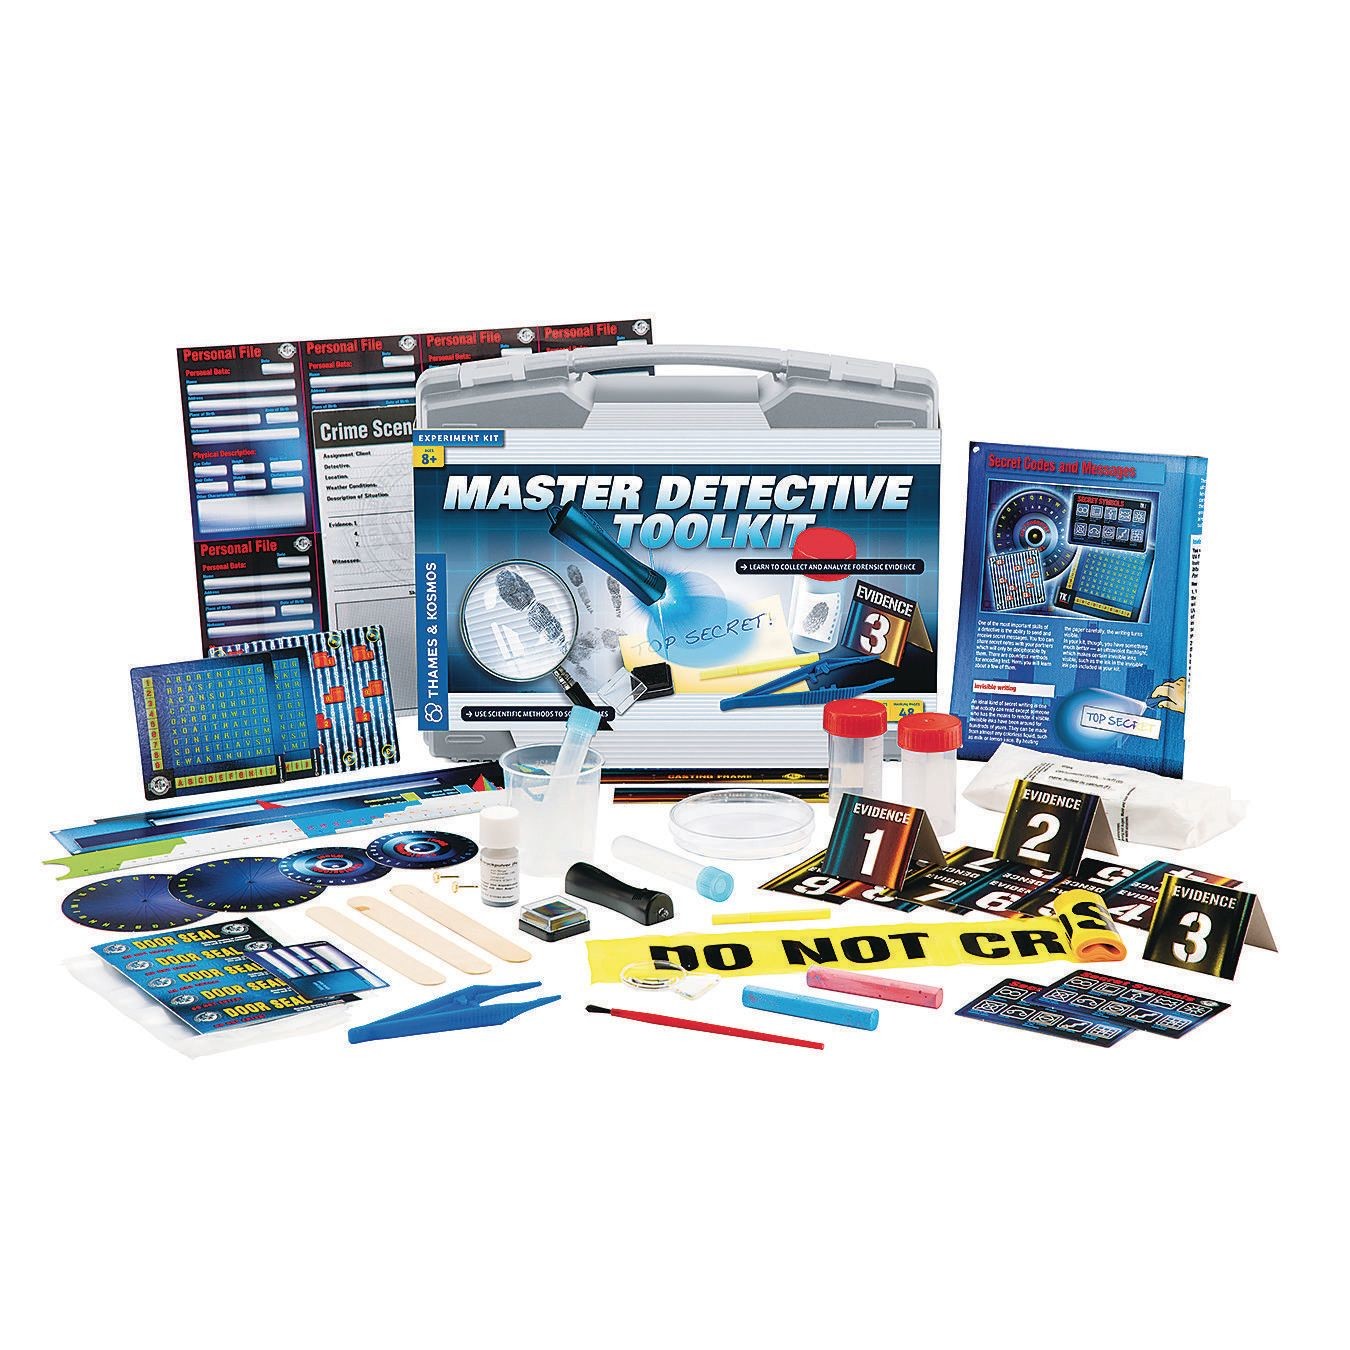 Thames & Kosmos 630912 Master Detective Toolkit 2015 for sale online 